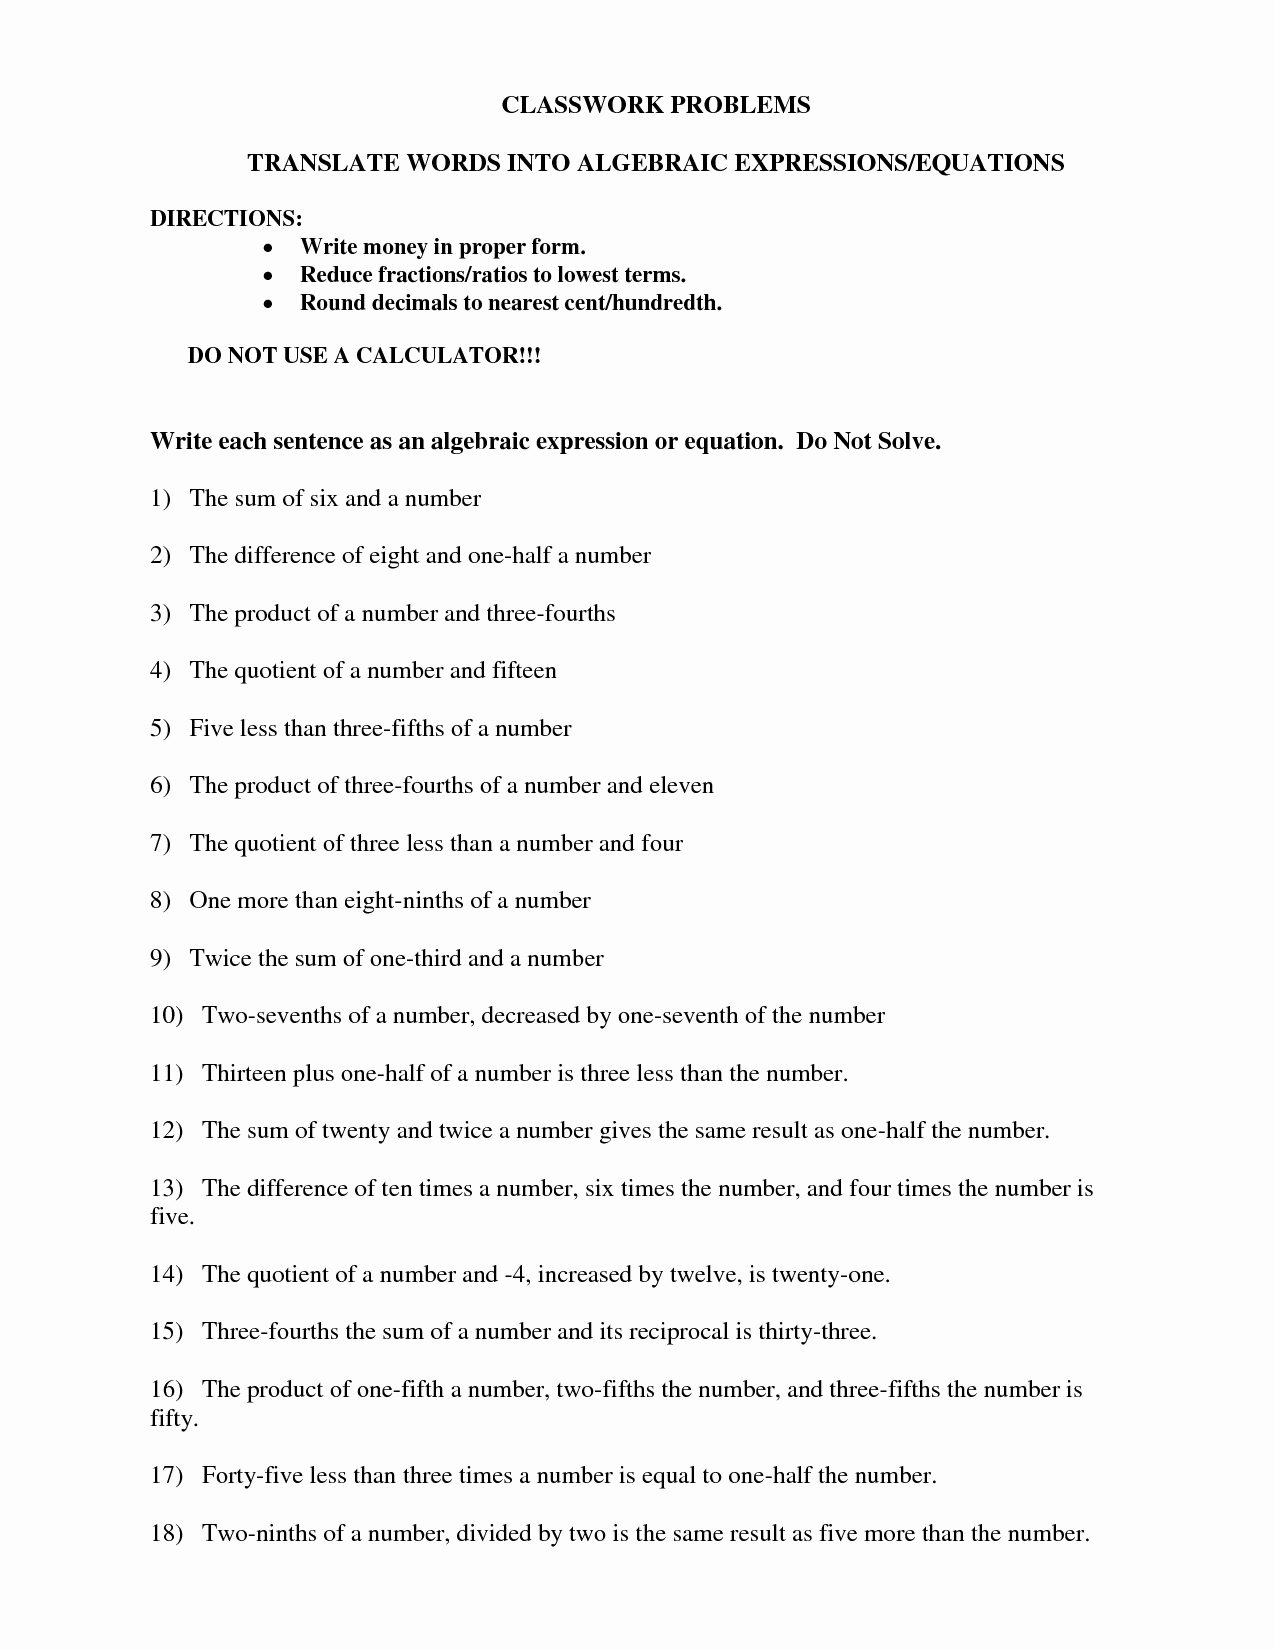 Writing Algebraic Expressions Worksheet Unique 16 Best Of Translating Verbal Expressions